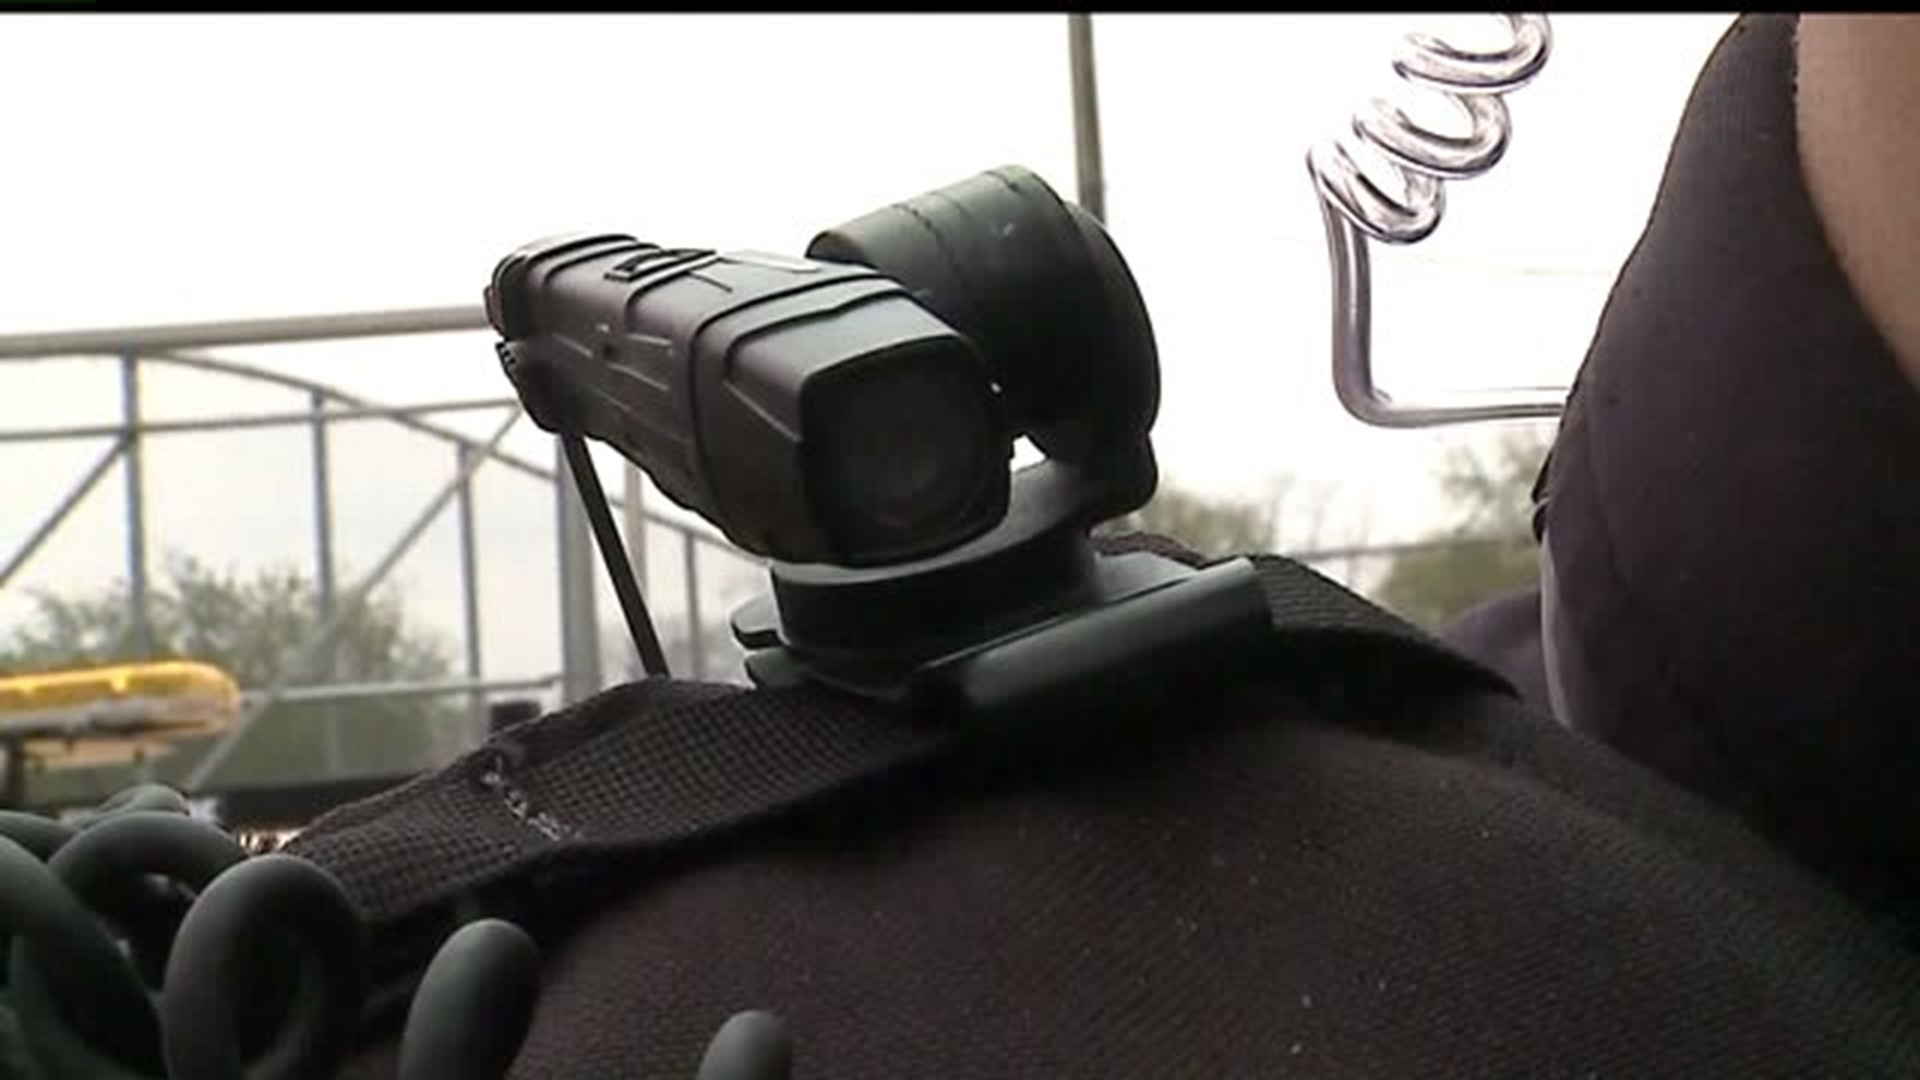 Police body cams protecting cops and civilians